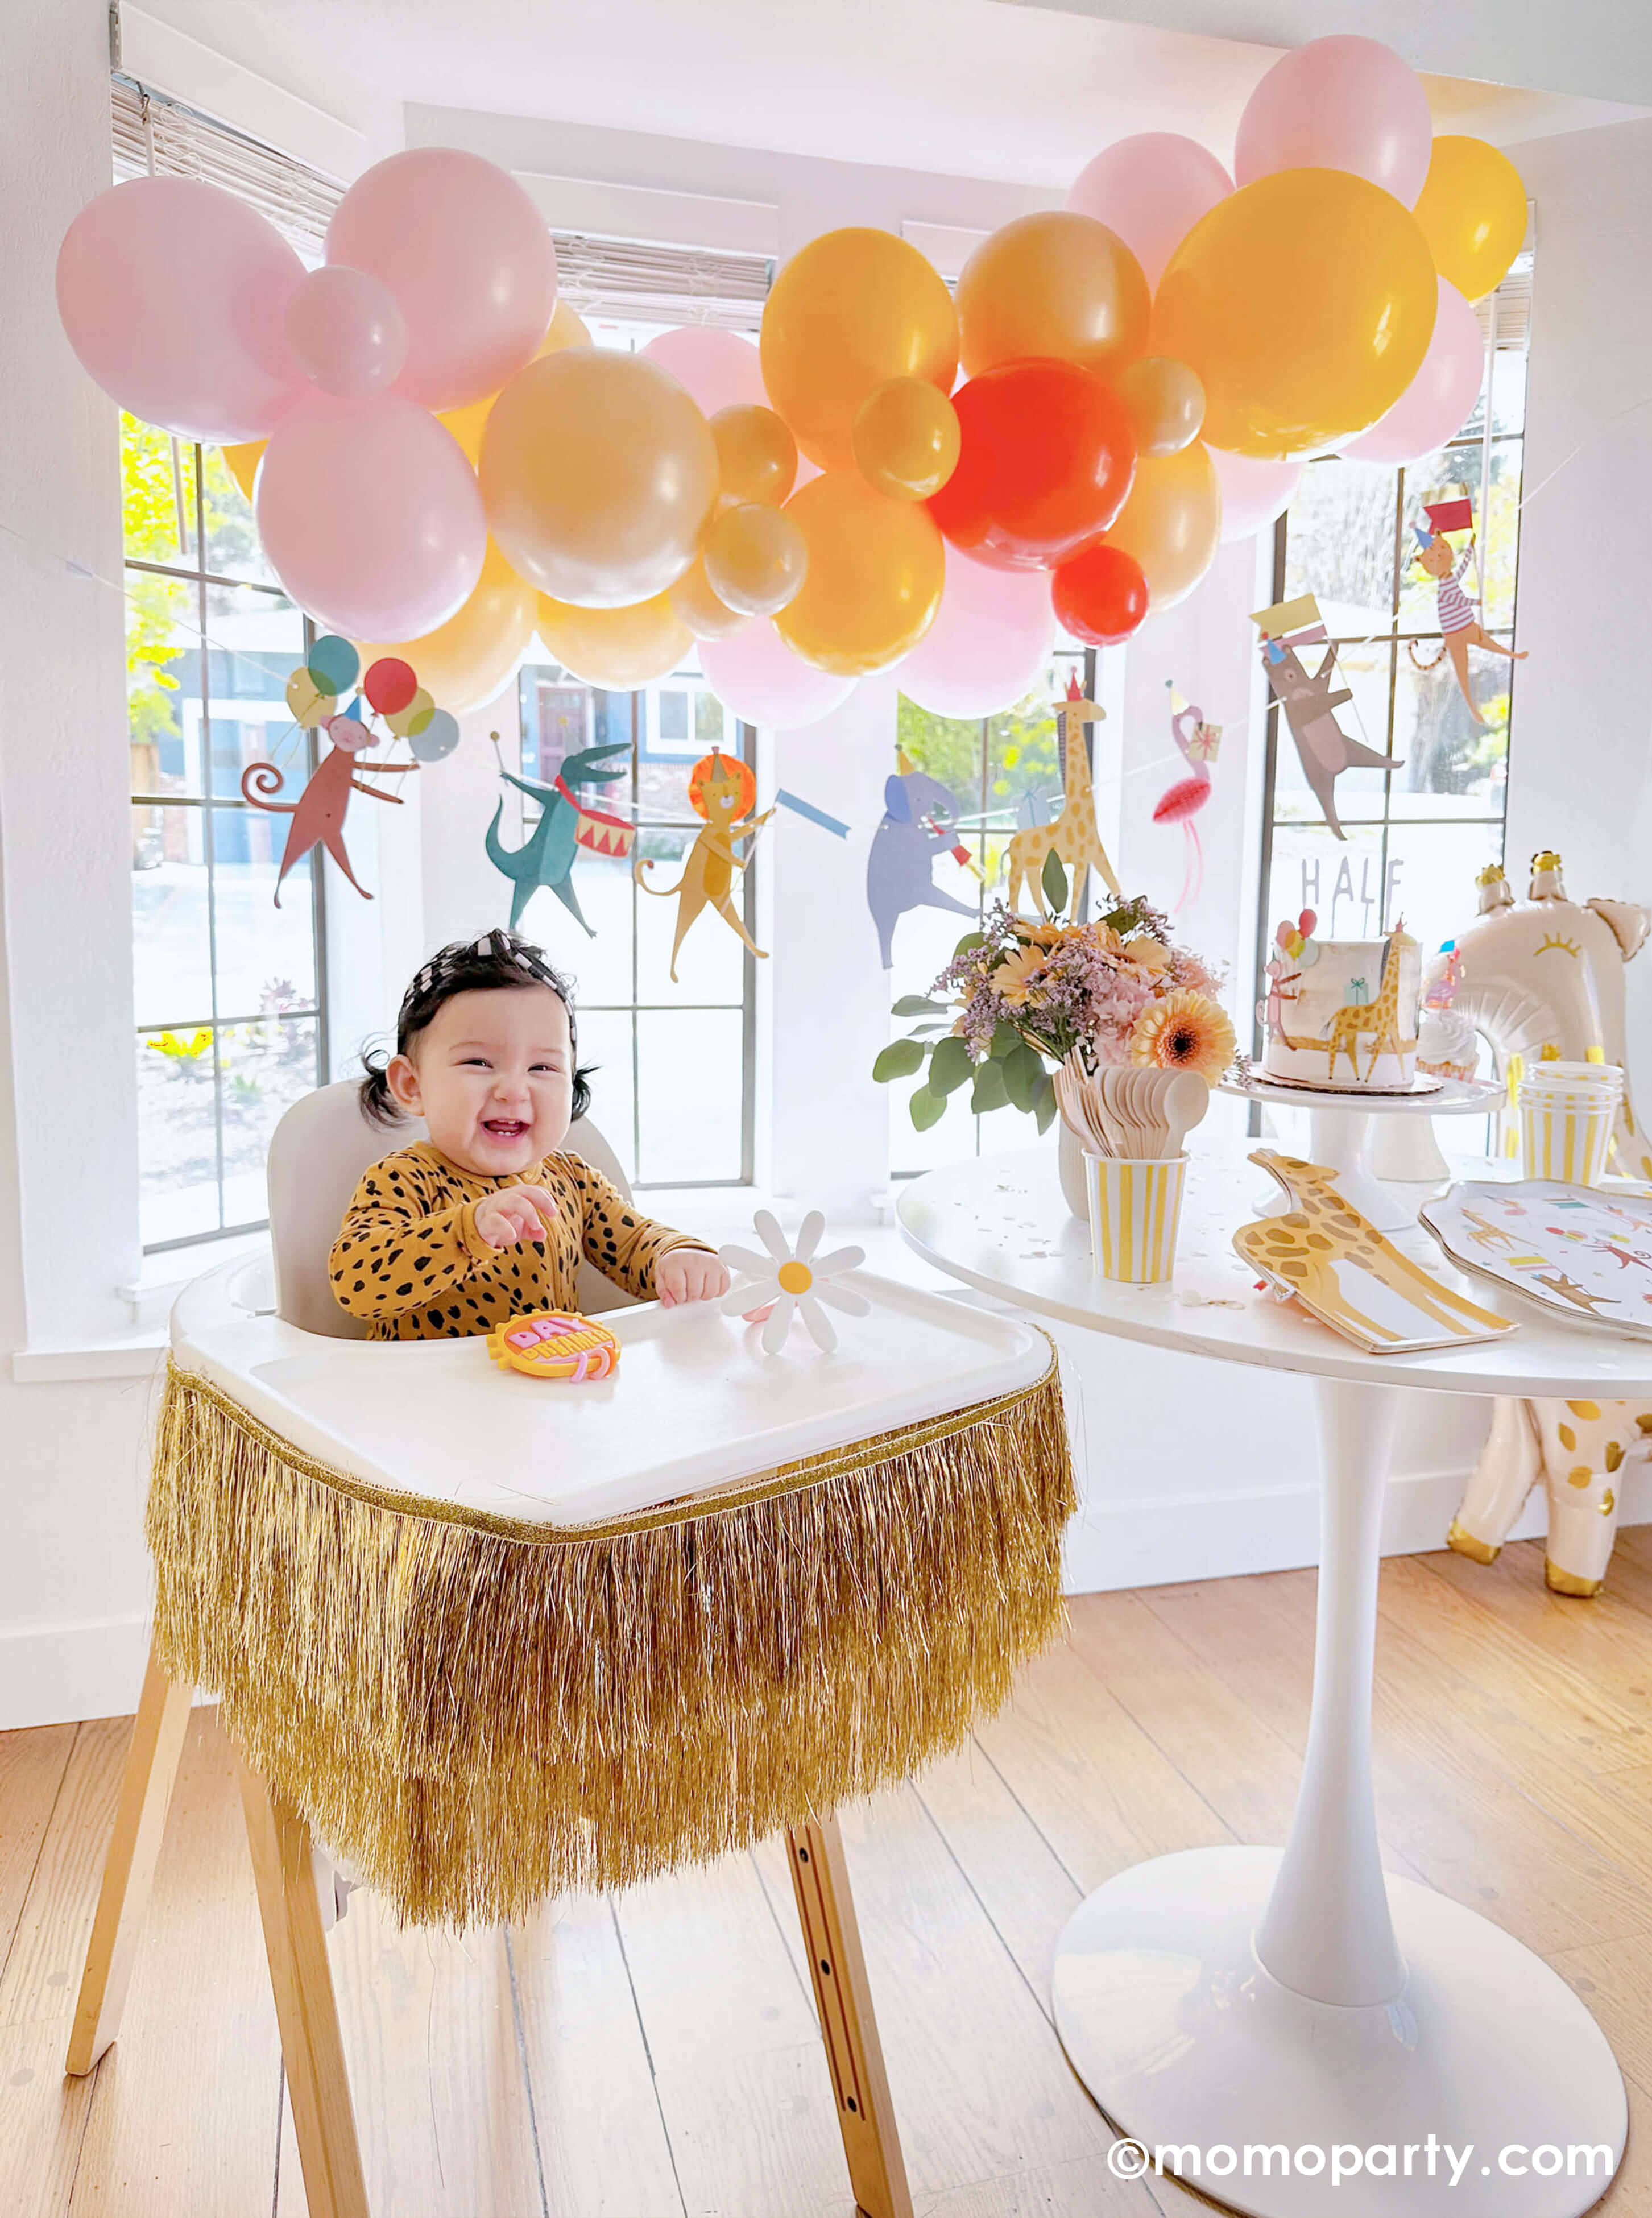 A happy baby girl's 6 months animal themed birthday party featuring Momo Party's animal parade birthday garland featuring a lion, an elephant, an alligator, a giraffe, along with a festive balloon garland in a warm color tone hanging above. On the dessert table, there are Meri Meri's animal parade dinner plates, giraffe shaped plates and cupcakes dressed with the safari animal toppers, next to the table there's a giraffe shaped foil balloon. One the left a highchair is decorated with a gold tinsel garland.